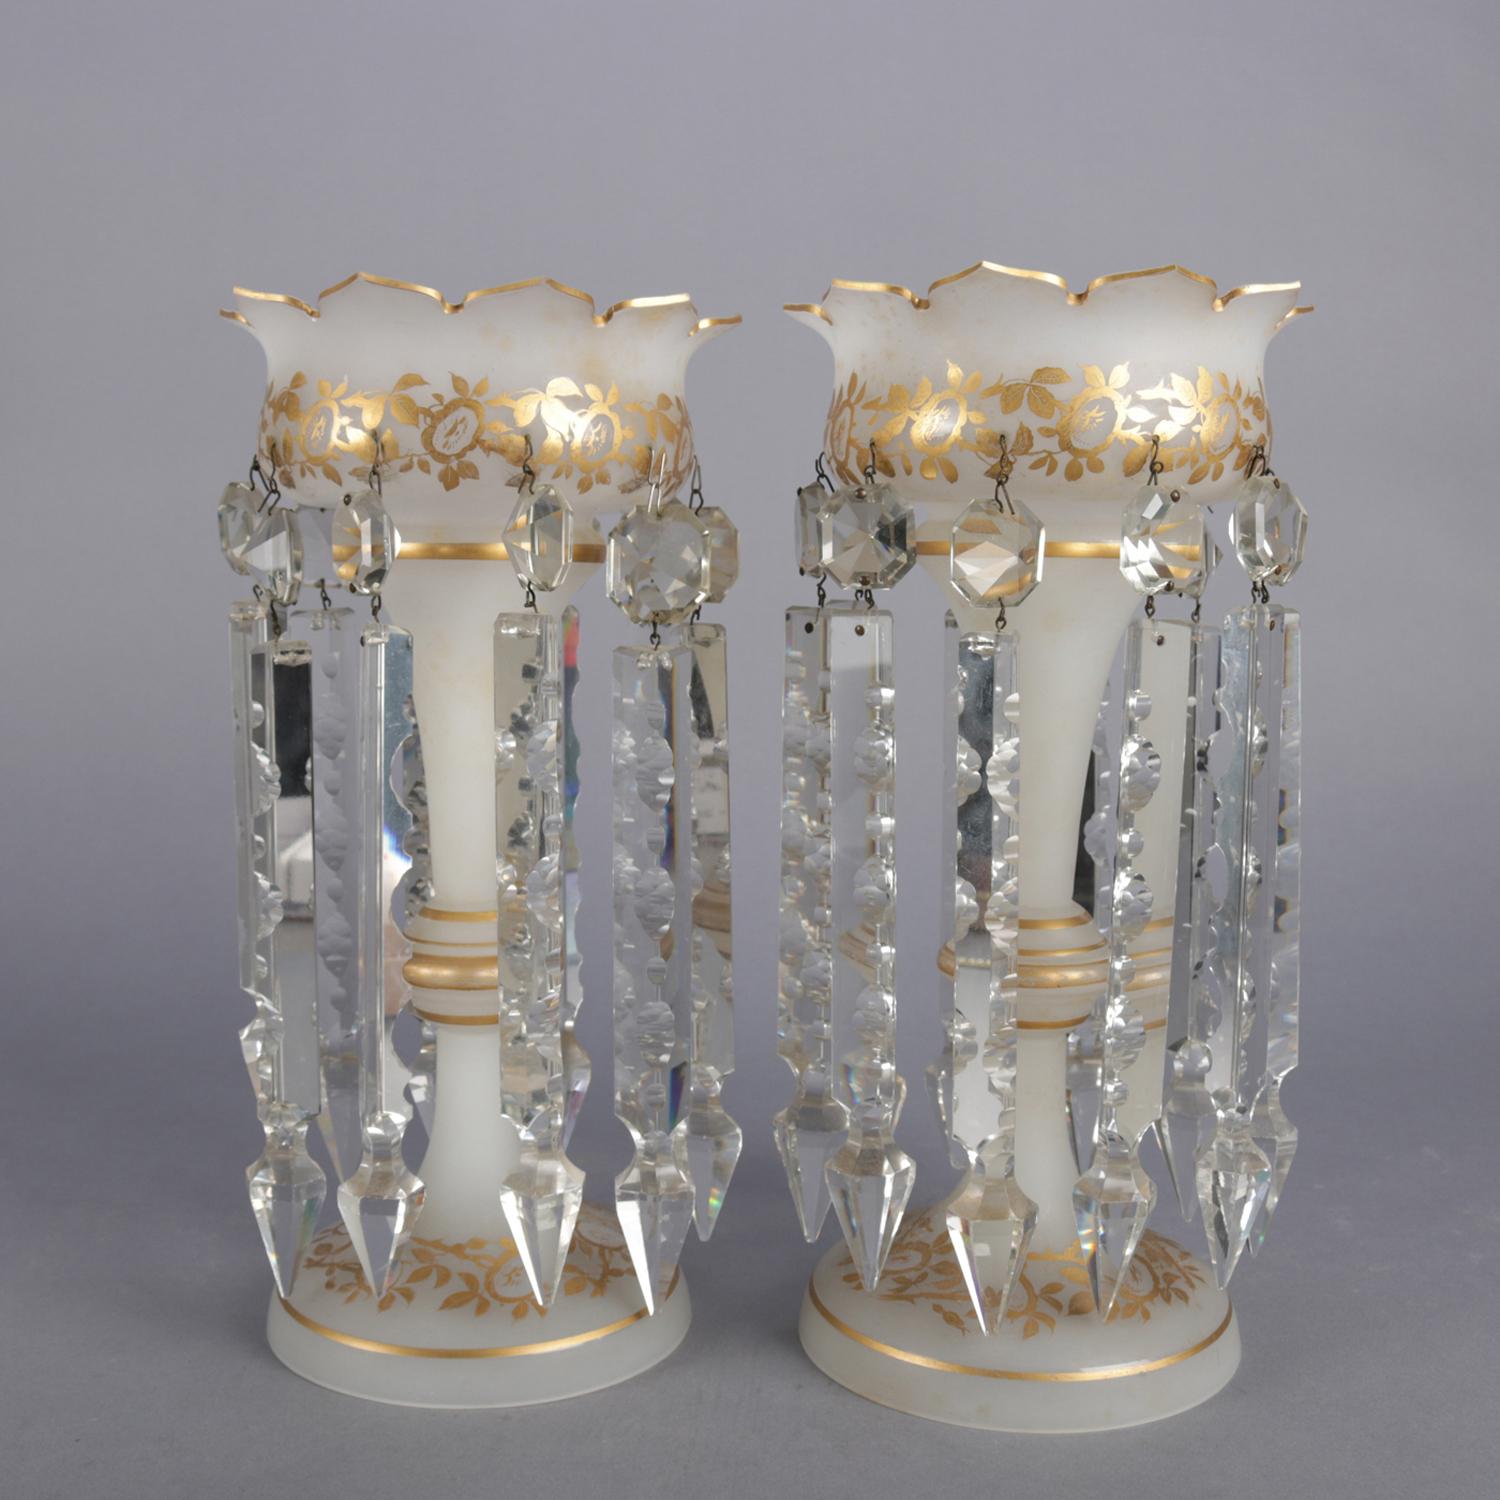 Pair of Victorian frosted mantle lusters feature frosted glass construction with flared scallop opening and hand painted gilt foliate decoration with hanging cut crystal prisms, circa 1890

Measures: 12.5